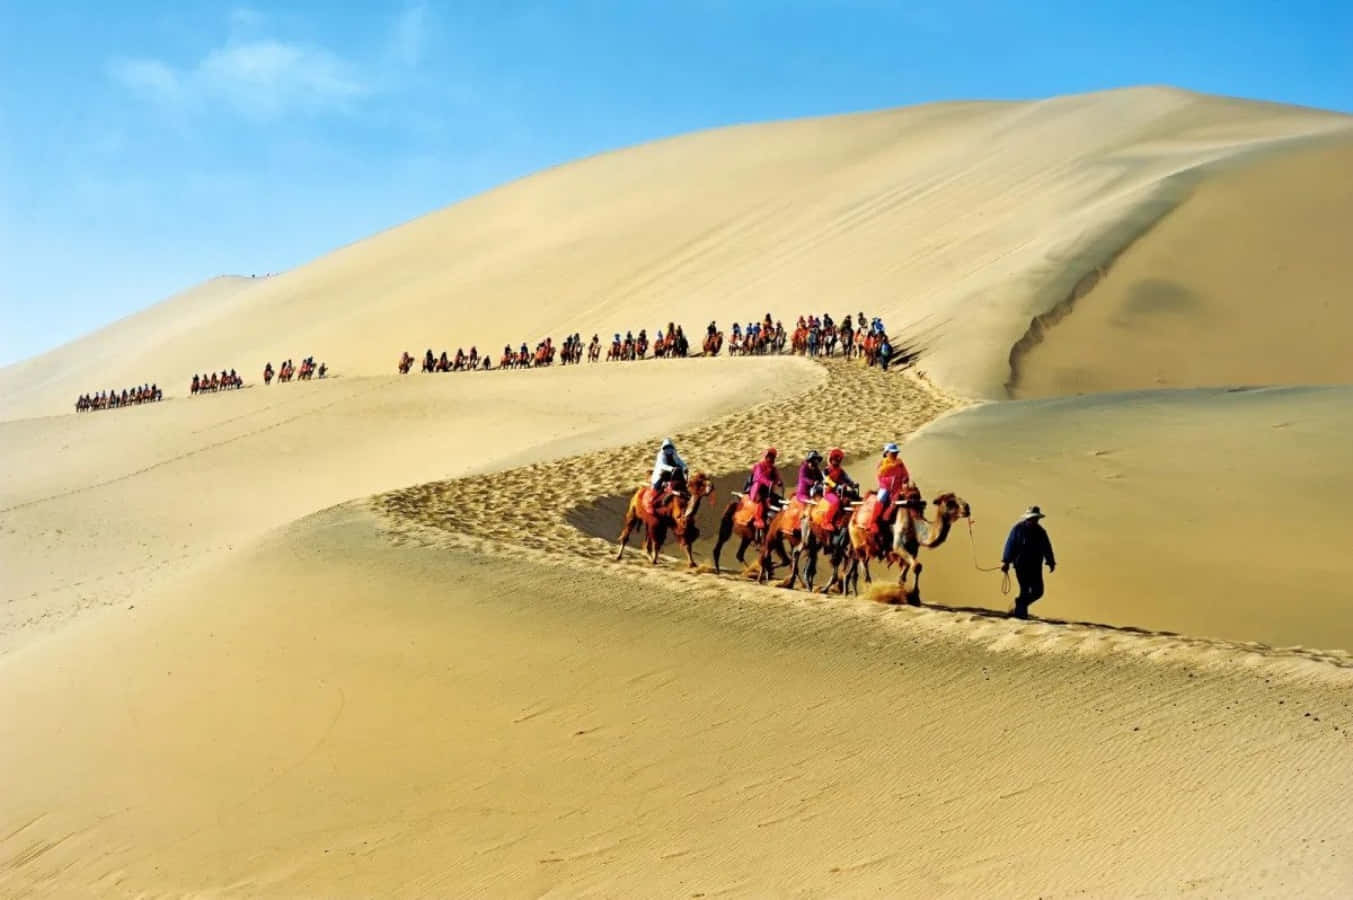 a group of people riding camels on a desert